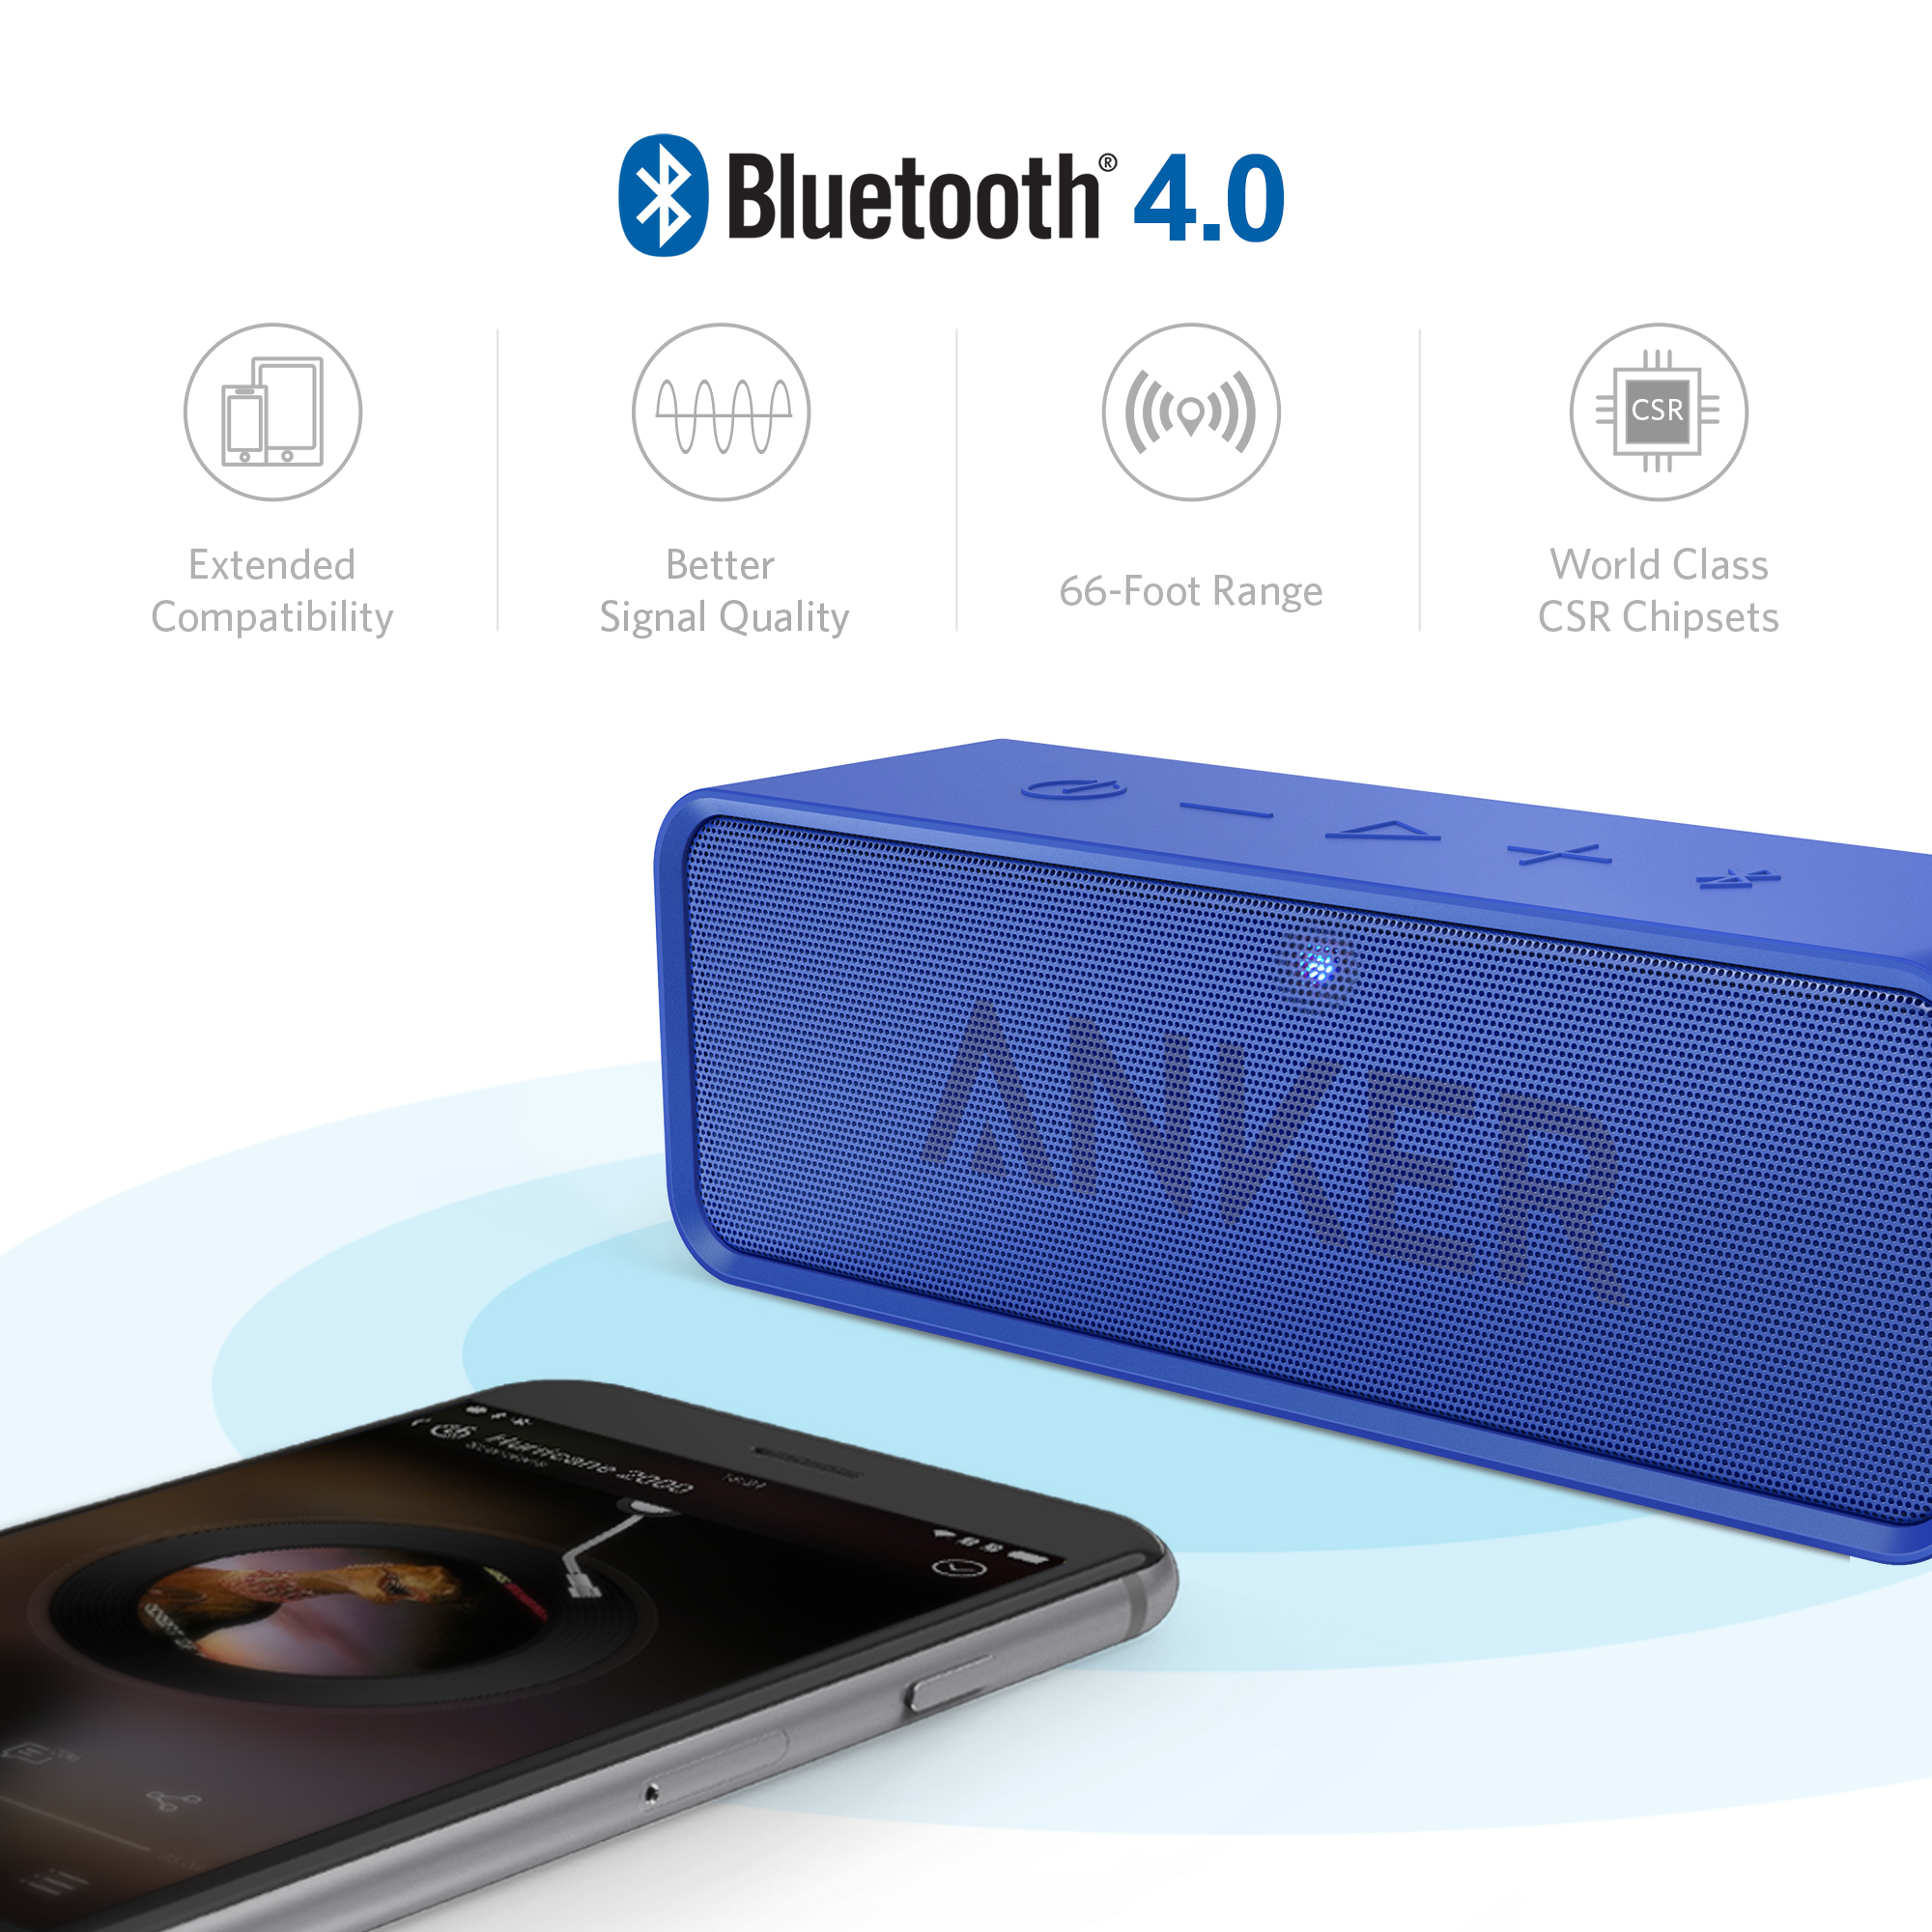 Anker Soundcore Bluetooth Speaker with 24-Hour Playtime, 66-Feet Bluetooth Range & Built-in Mic, Dual-Driver Portable Wireless Speaker with Low Harmonic Distortion and Superior Sound - Blue Blue Speaker - image 2 of 4